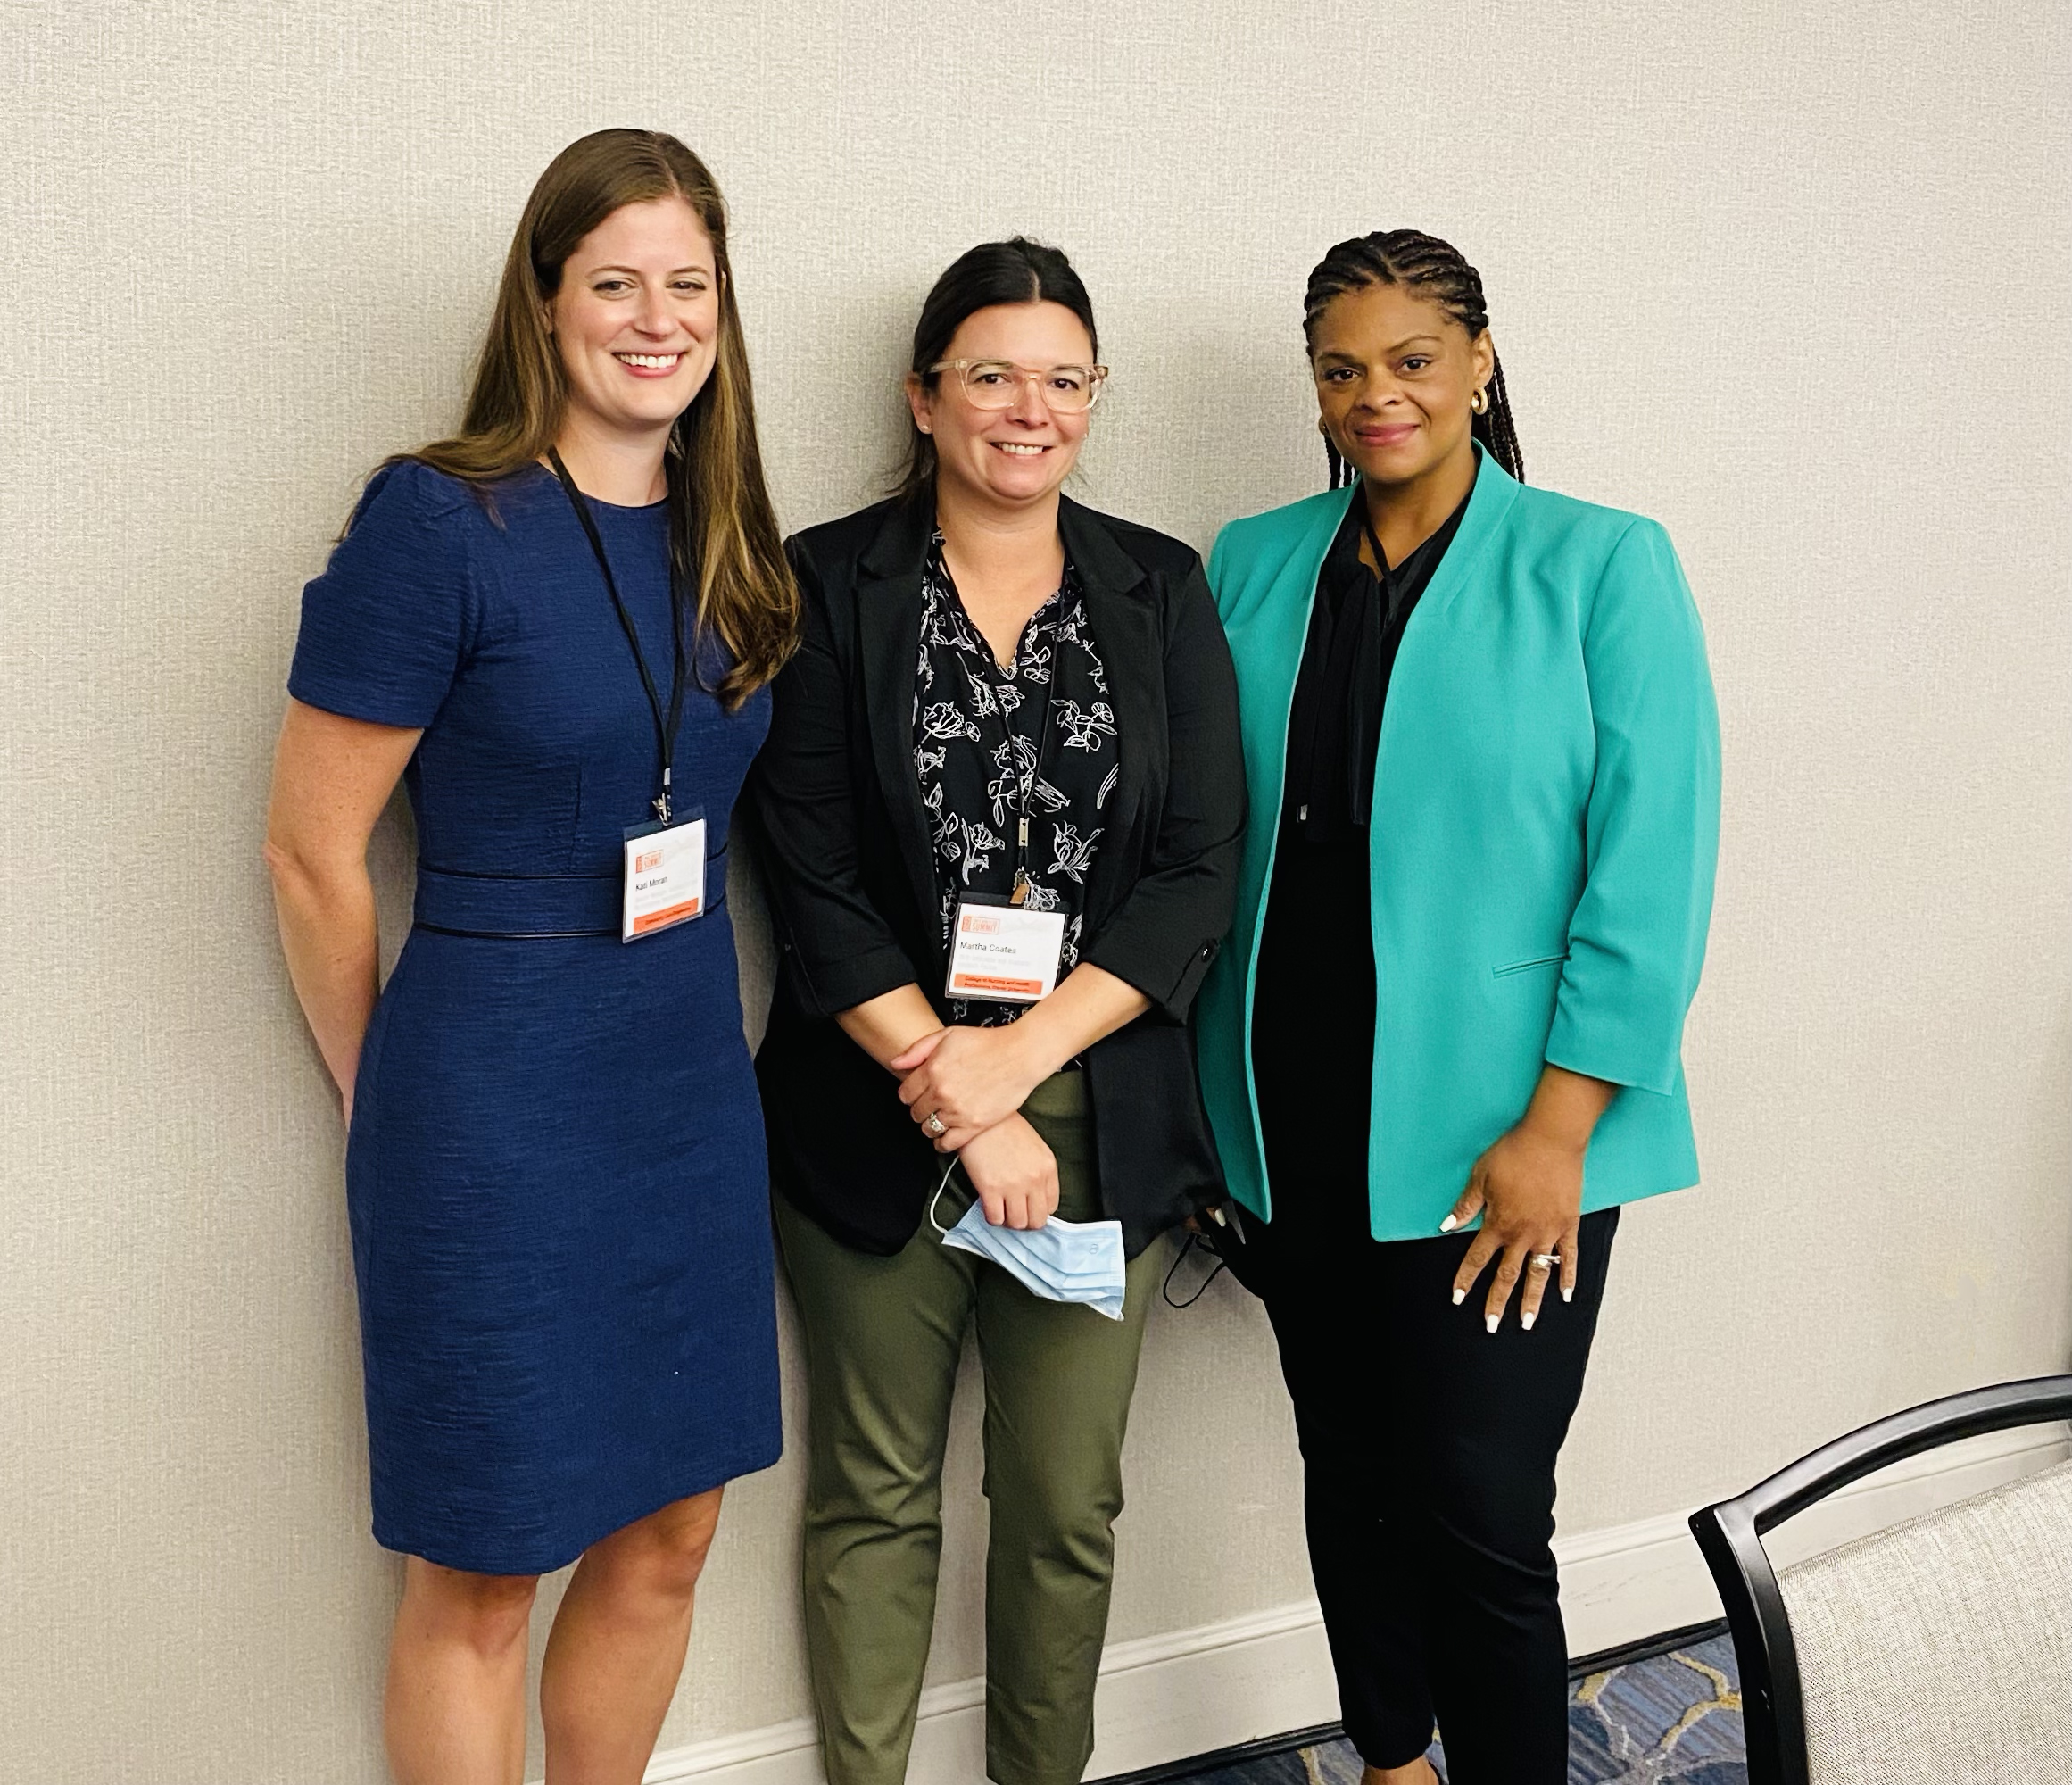 Kati Moran senior manager, Telehealth and Performance Improvement, Community Care Cooperative, College of Nursing and Health Professions' PhD candidate Martha Coates, MSN and Angela Foreshaw-Rouse